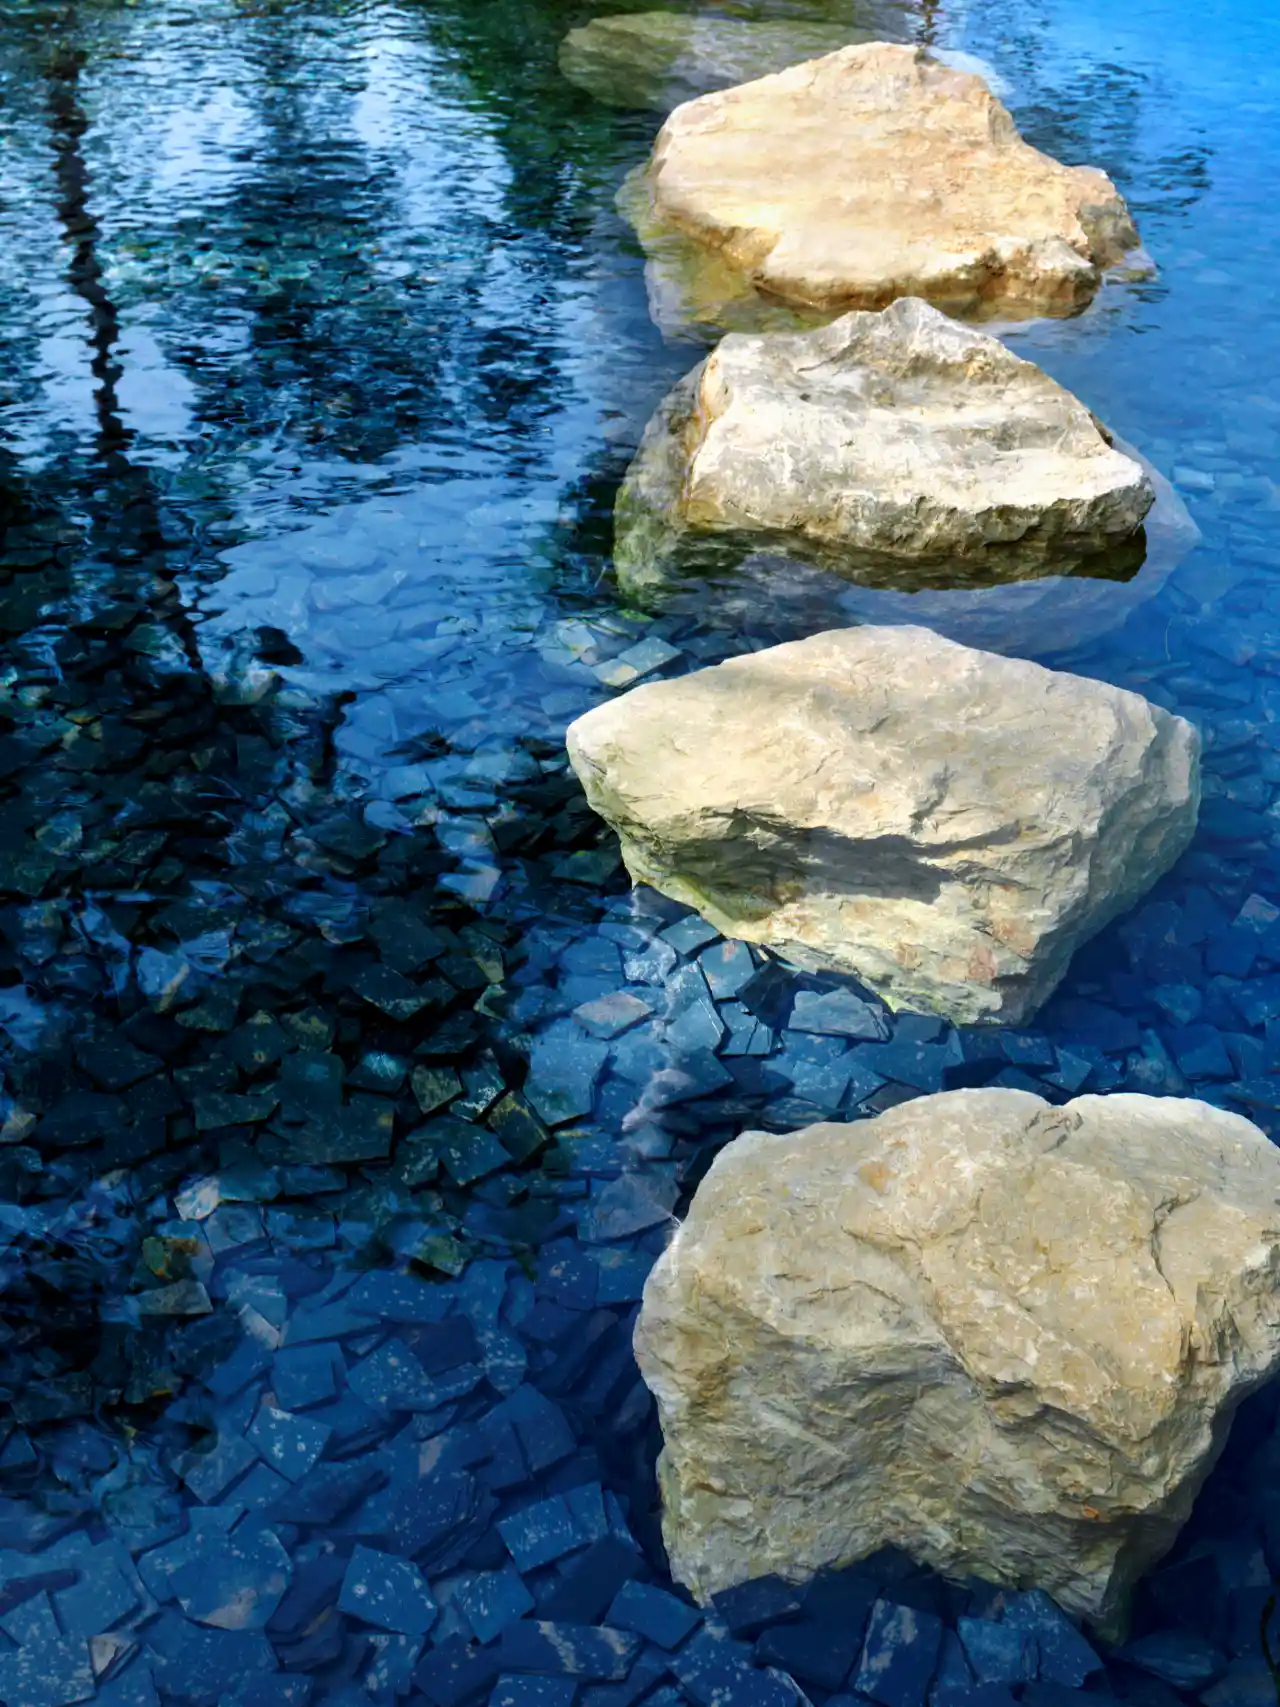 stepping stones across a river as a metaphor for the path to finding meaning at work